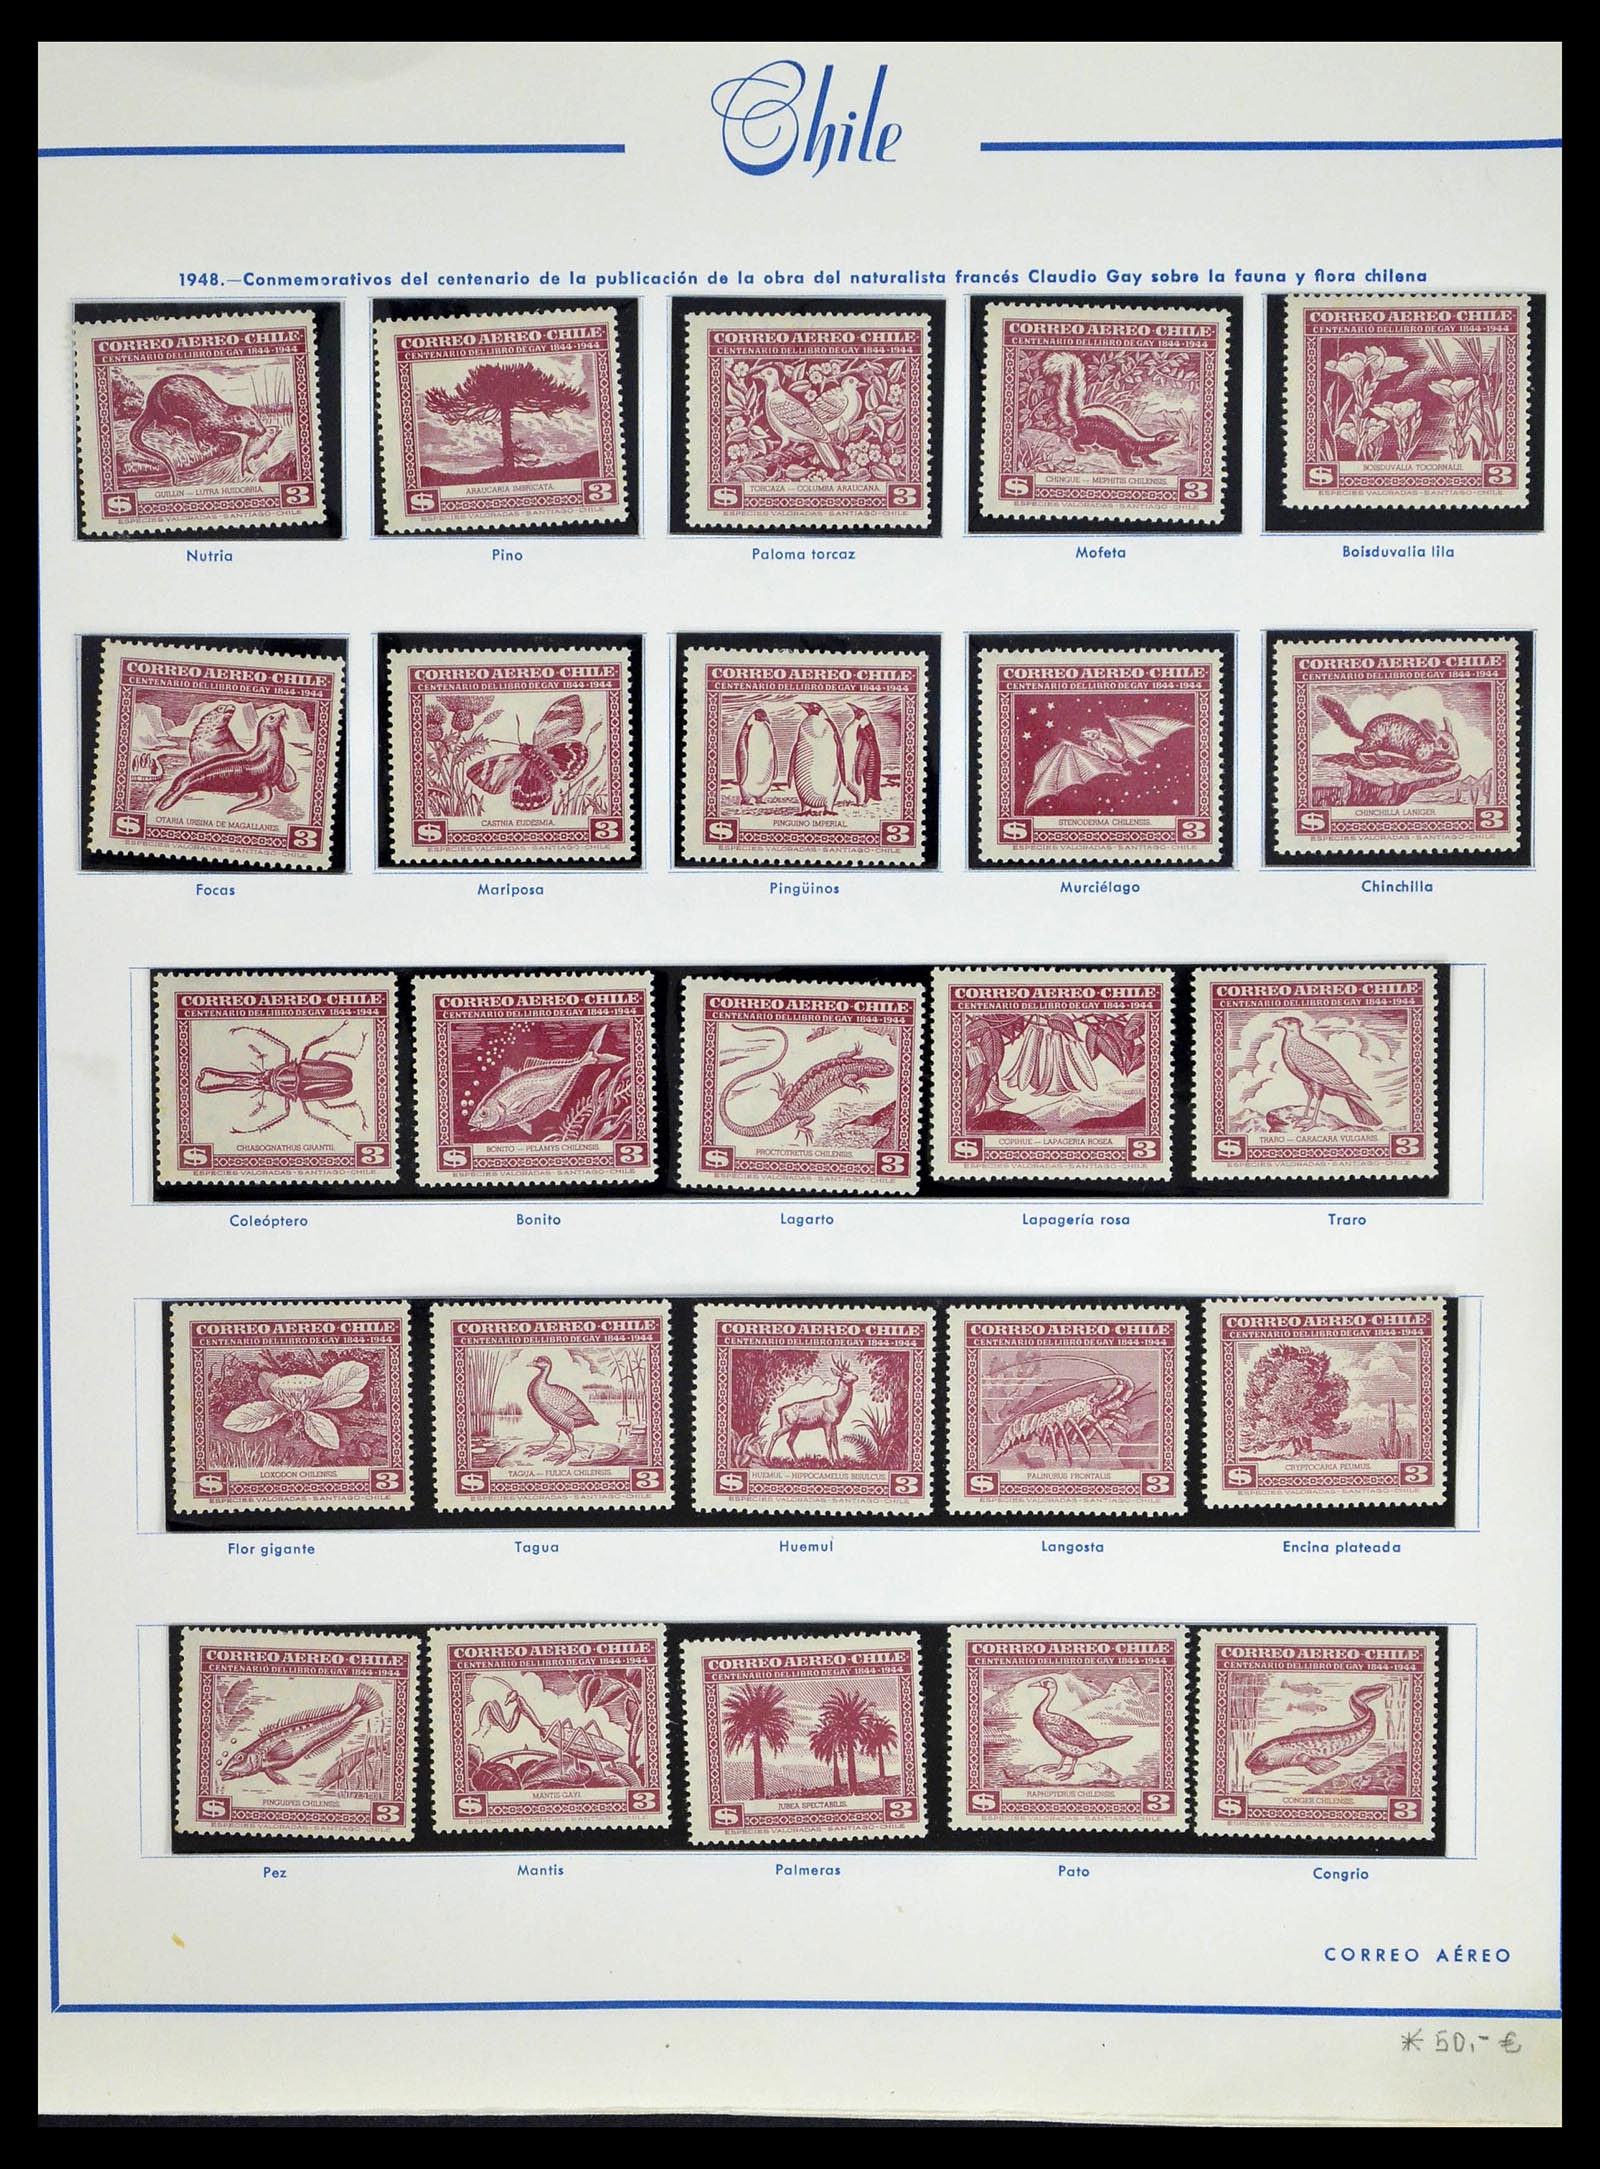 39213 0050 - Stamp collection 39213 Chile 1853-1970.